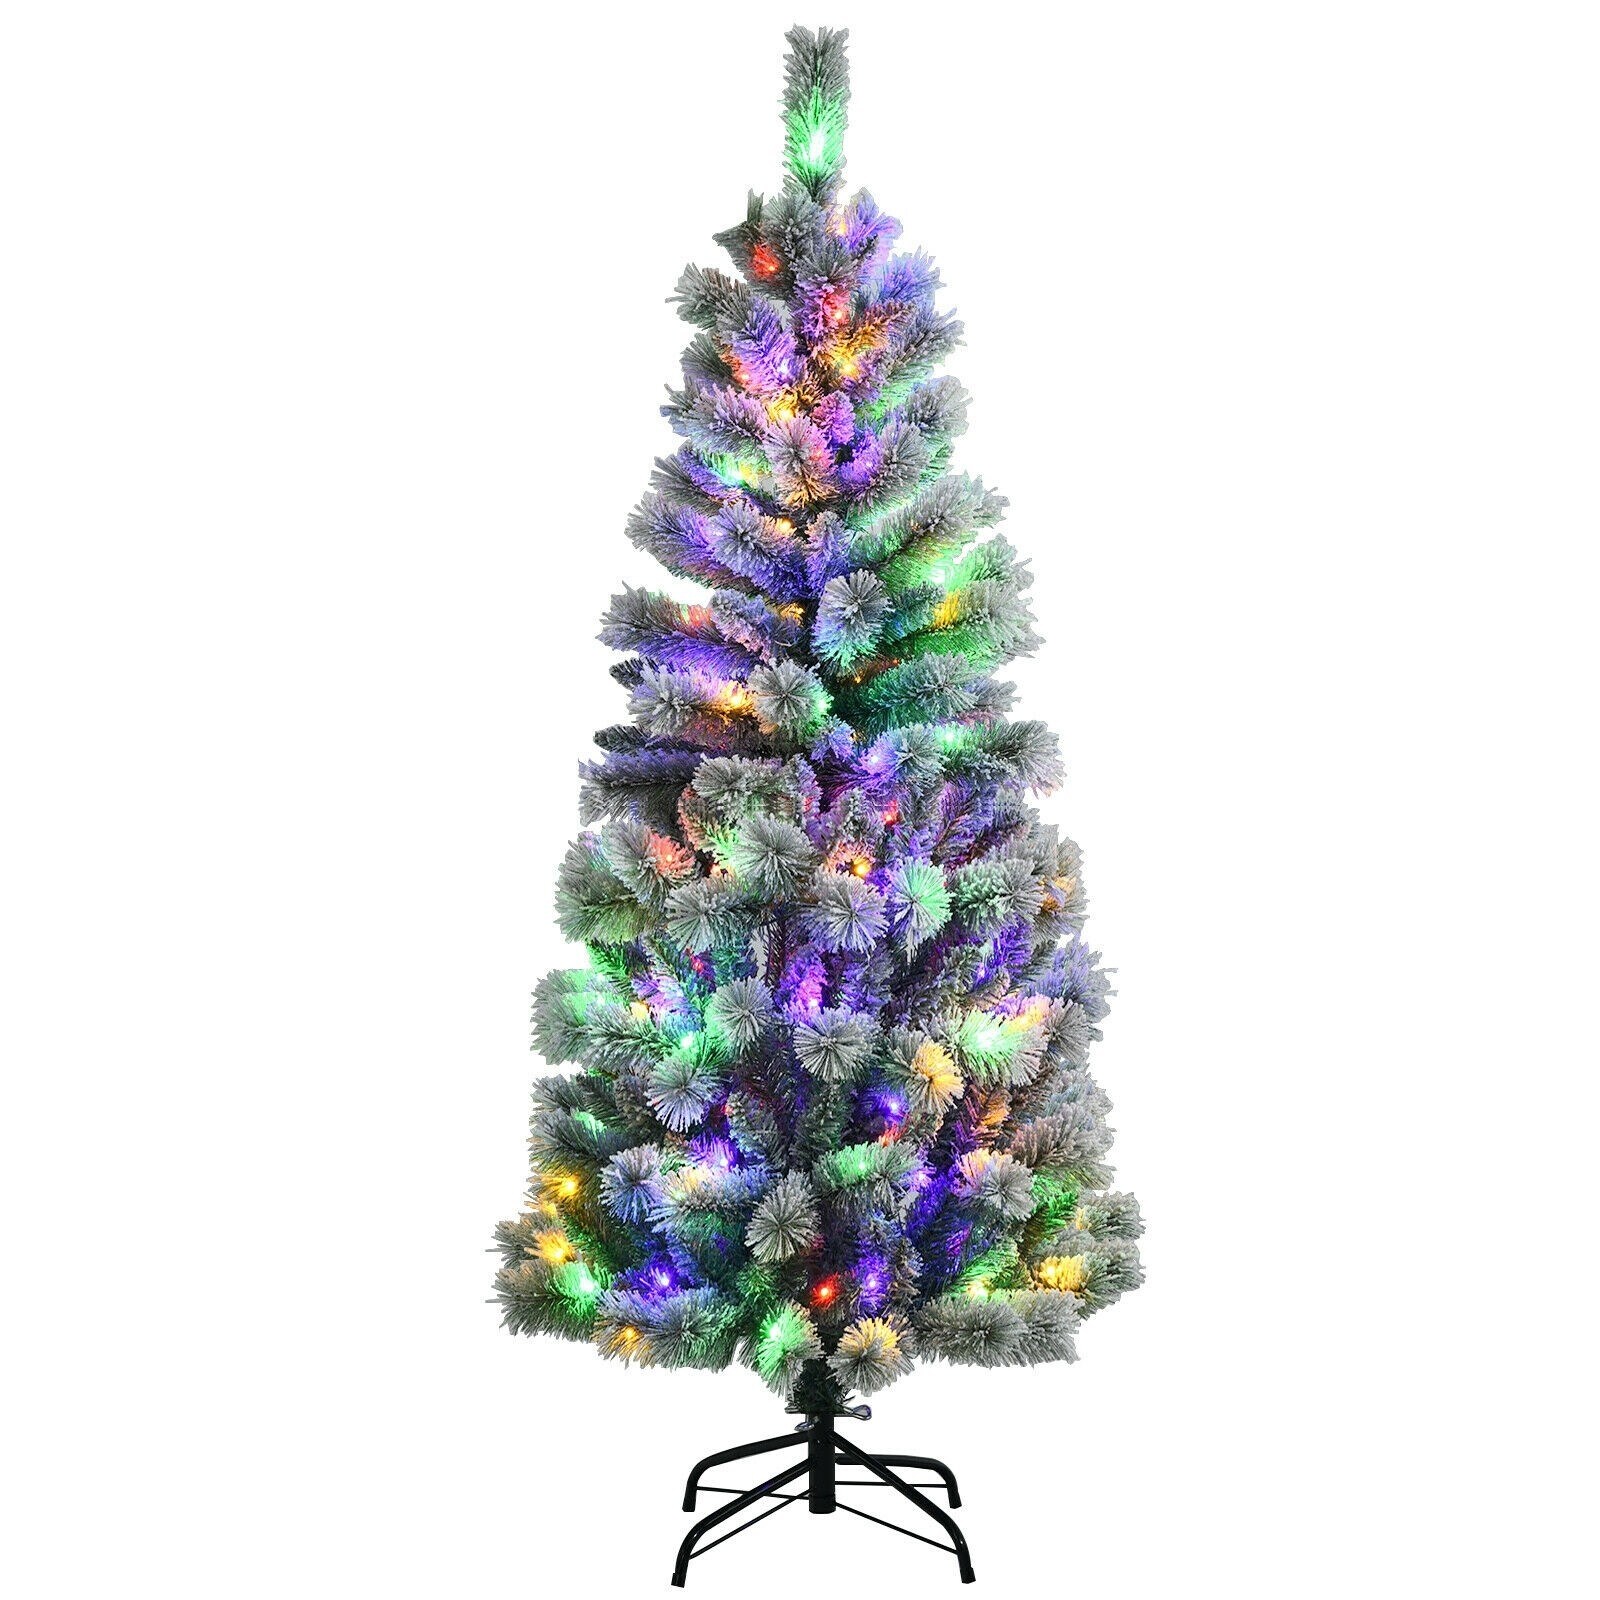 https://ak1.ostkcdn.com/images/products/is/images/direct/5f92ff38191b3b1652fb96121ea7fb3ef7aac6ab/Pre-Lit-Hinged-Christmas-Tree-with-Remote-Control-Lights.jpg